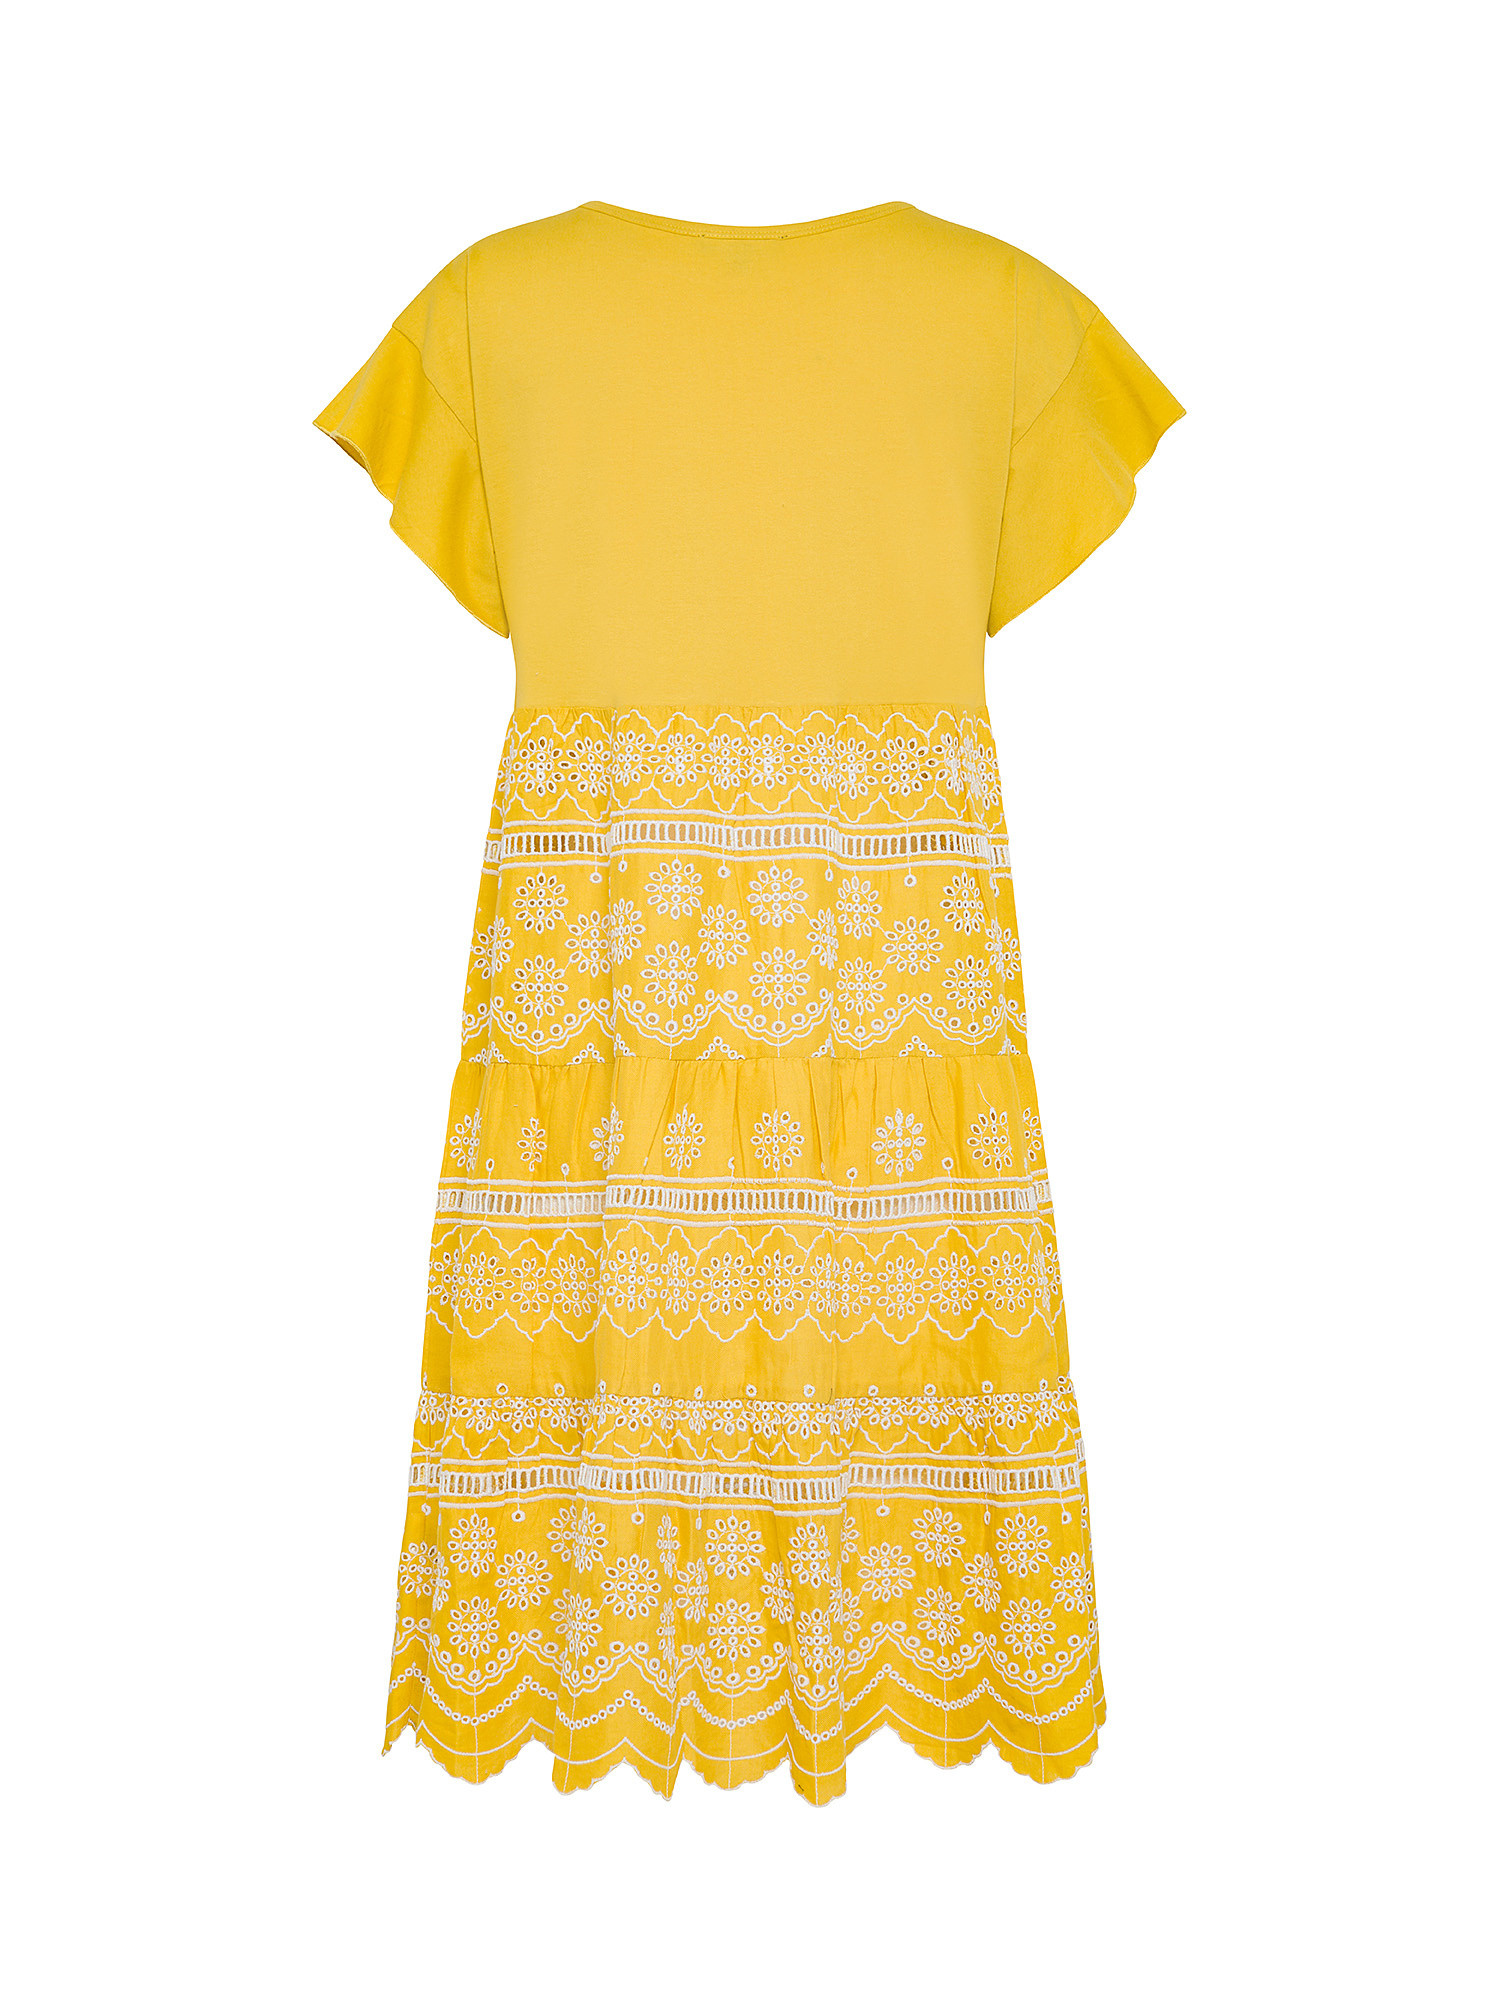 Koan - Cotton dress with flounces, Yellow, large image number 1